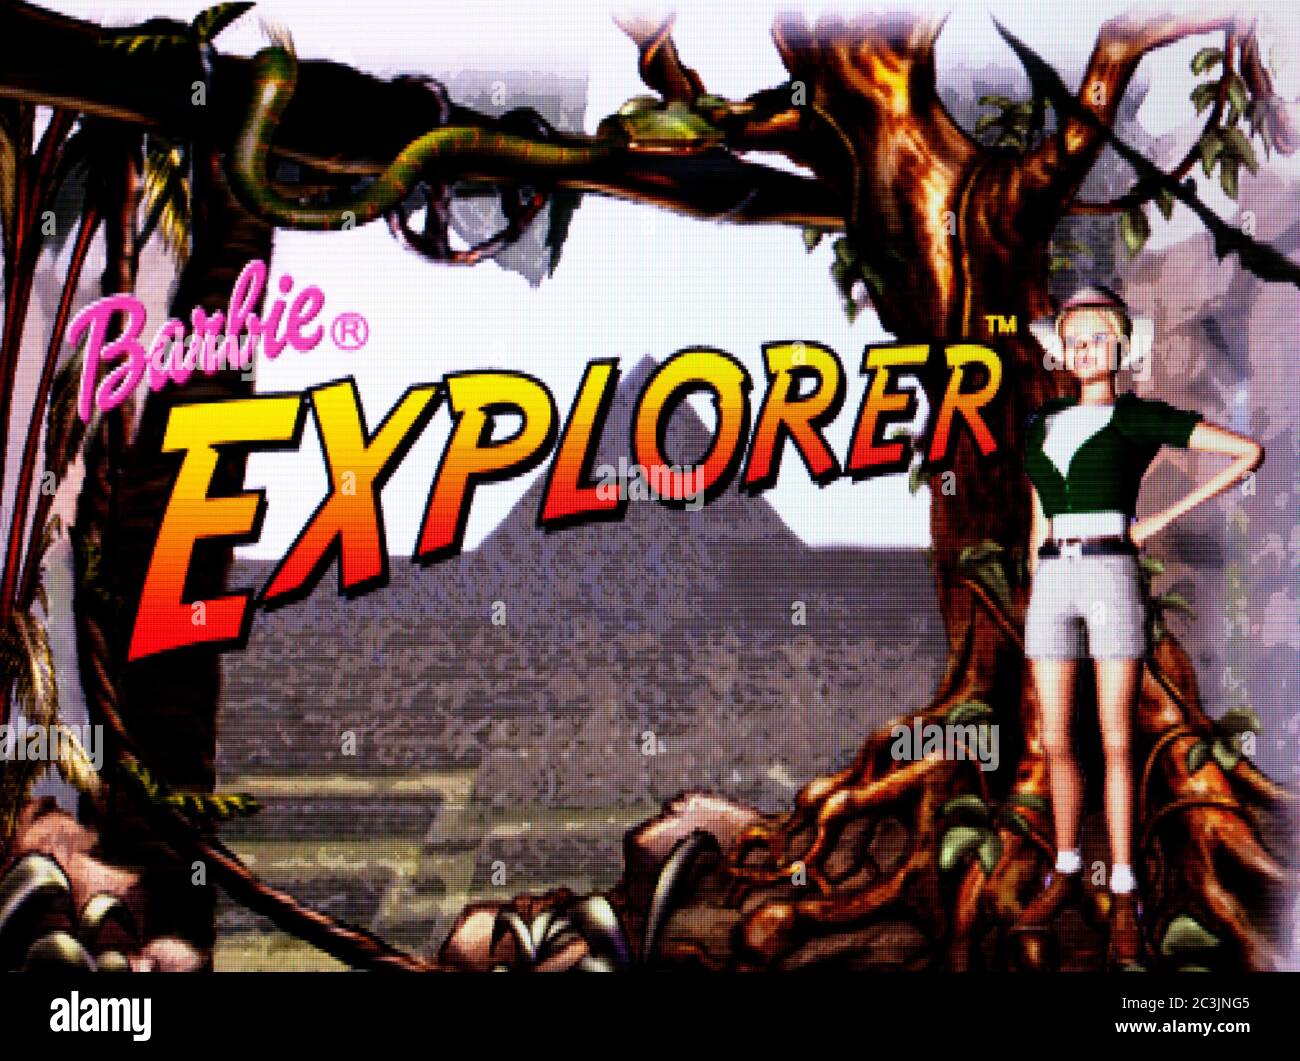 Barbie Explorer - Sony Playstation 1 PS1 PSX - Editorial use only Stock Photo